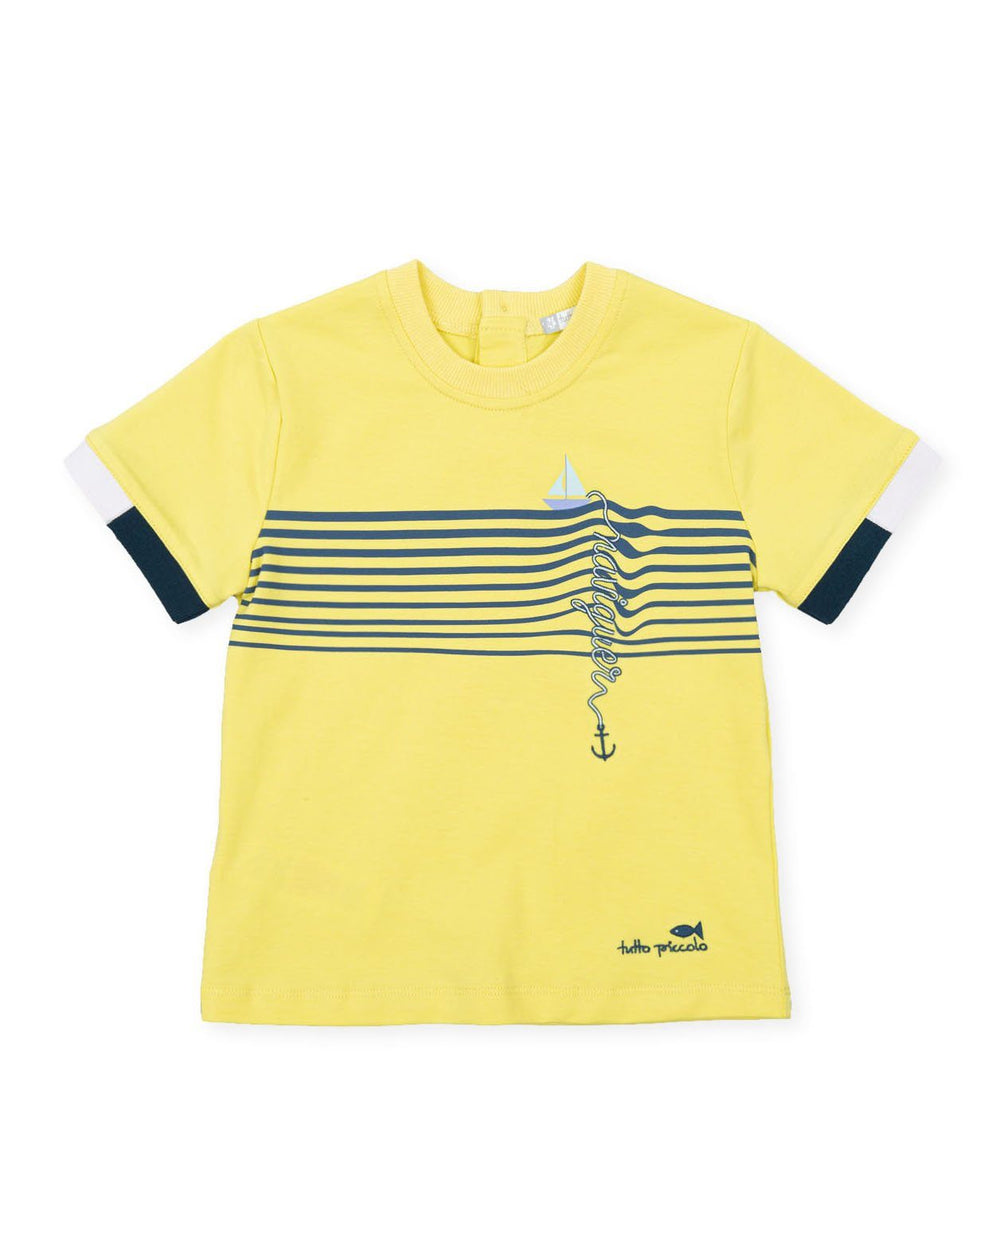 Tutto Piccolo "Ray" Yellow Nautical T-Shirt | iphoneandroidapplications